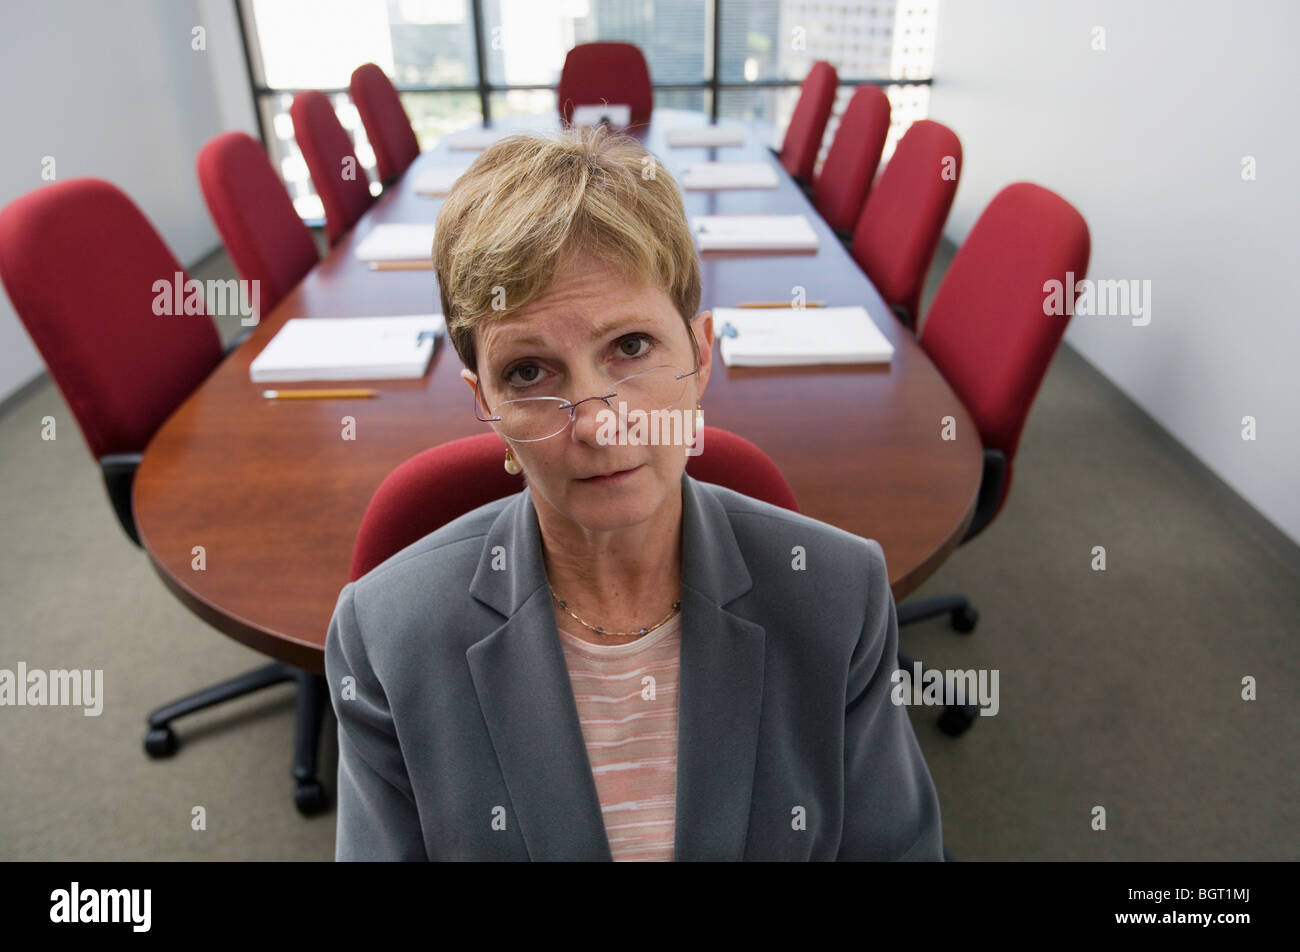 Overwhelmed corporate executive before conference meeting. Stock Photo